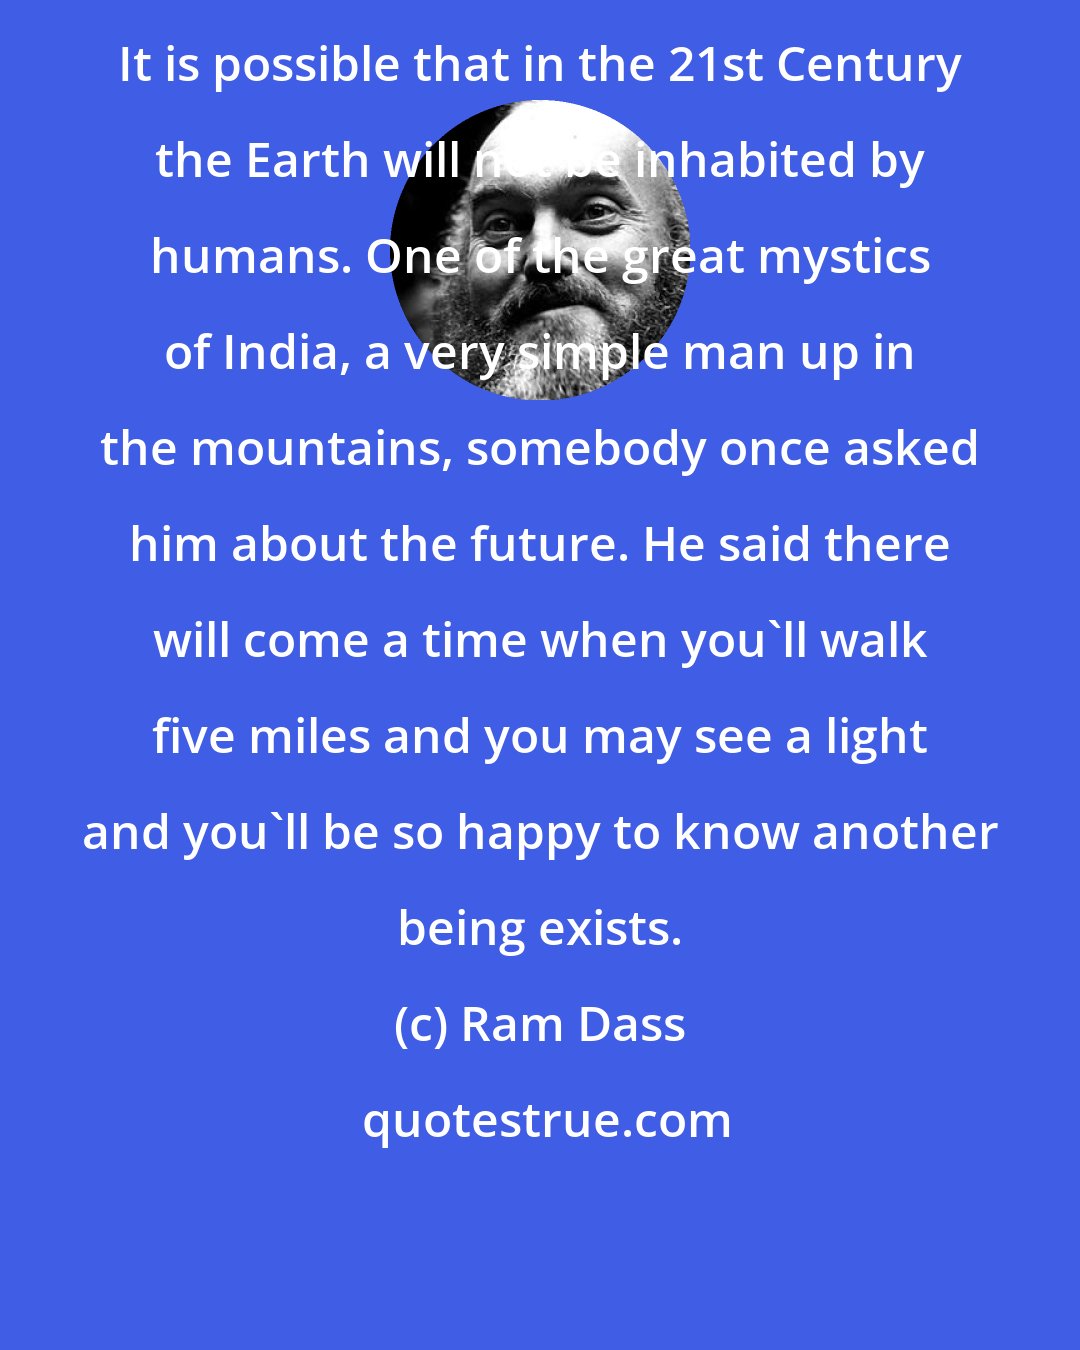 Ram Dass: It is possible that in the 21st Century the Earth will not be inhabited by humans. One of the great mystics of India, a very simple man up in the mountains, somebody once asked him about the future. He said there will come a time when you'll walk five miles and you may see a light and you'll be so happy to know another being exists.